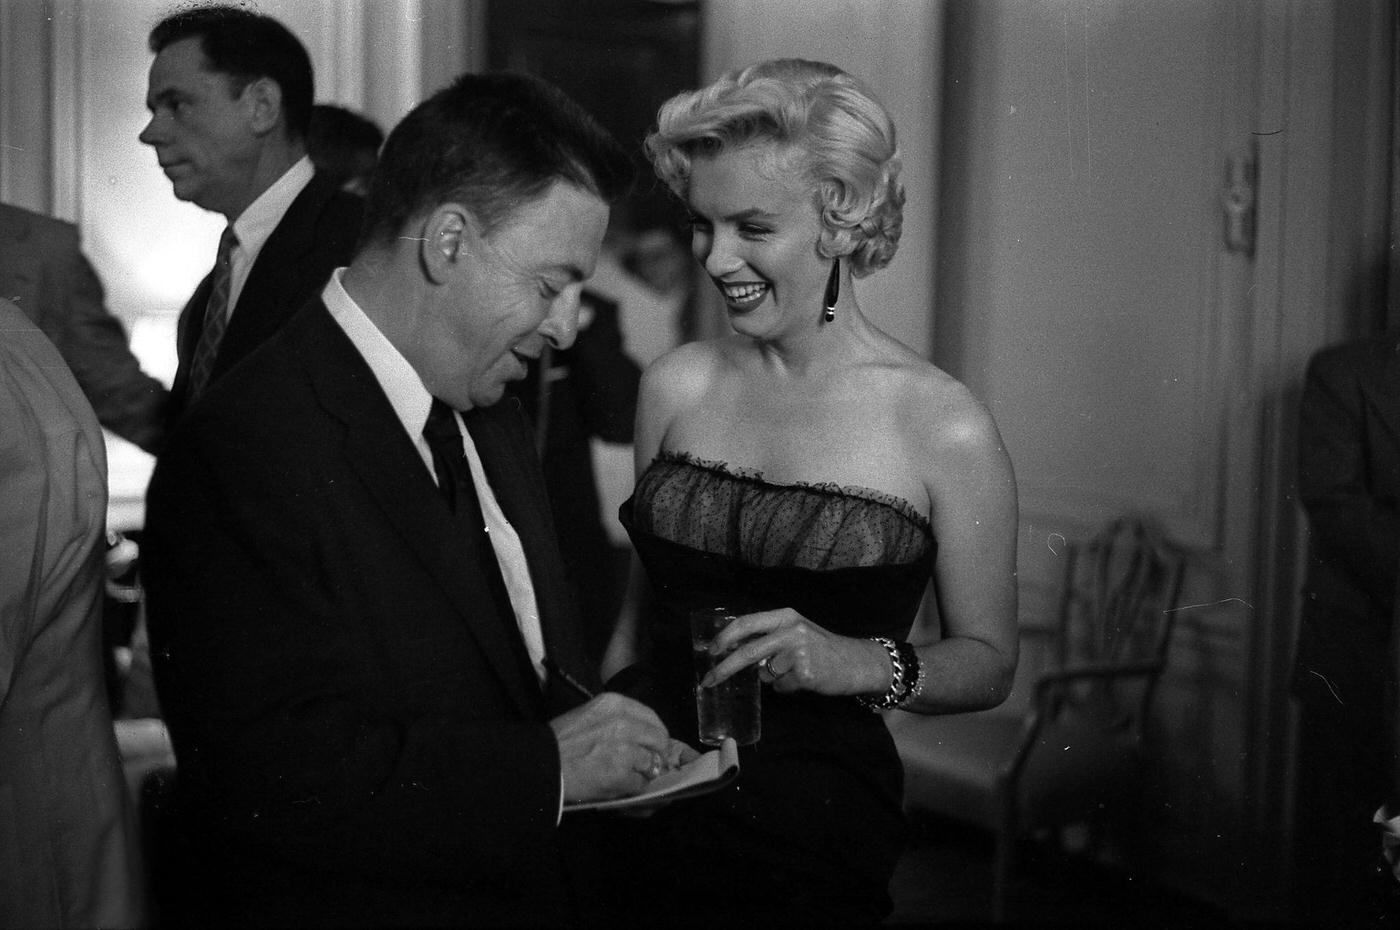 Marilyn Monroe with co-star Tom Ewell and newspaper columnist Earl Wilson at a press party for "The Seven Year Itch" in 1954 in New York